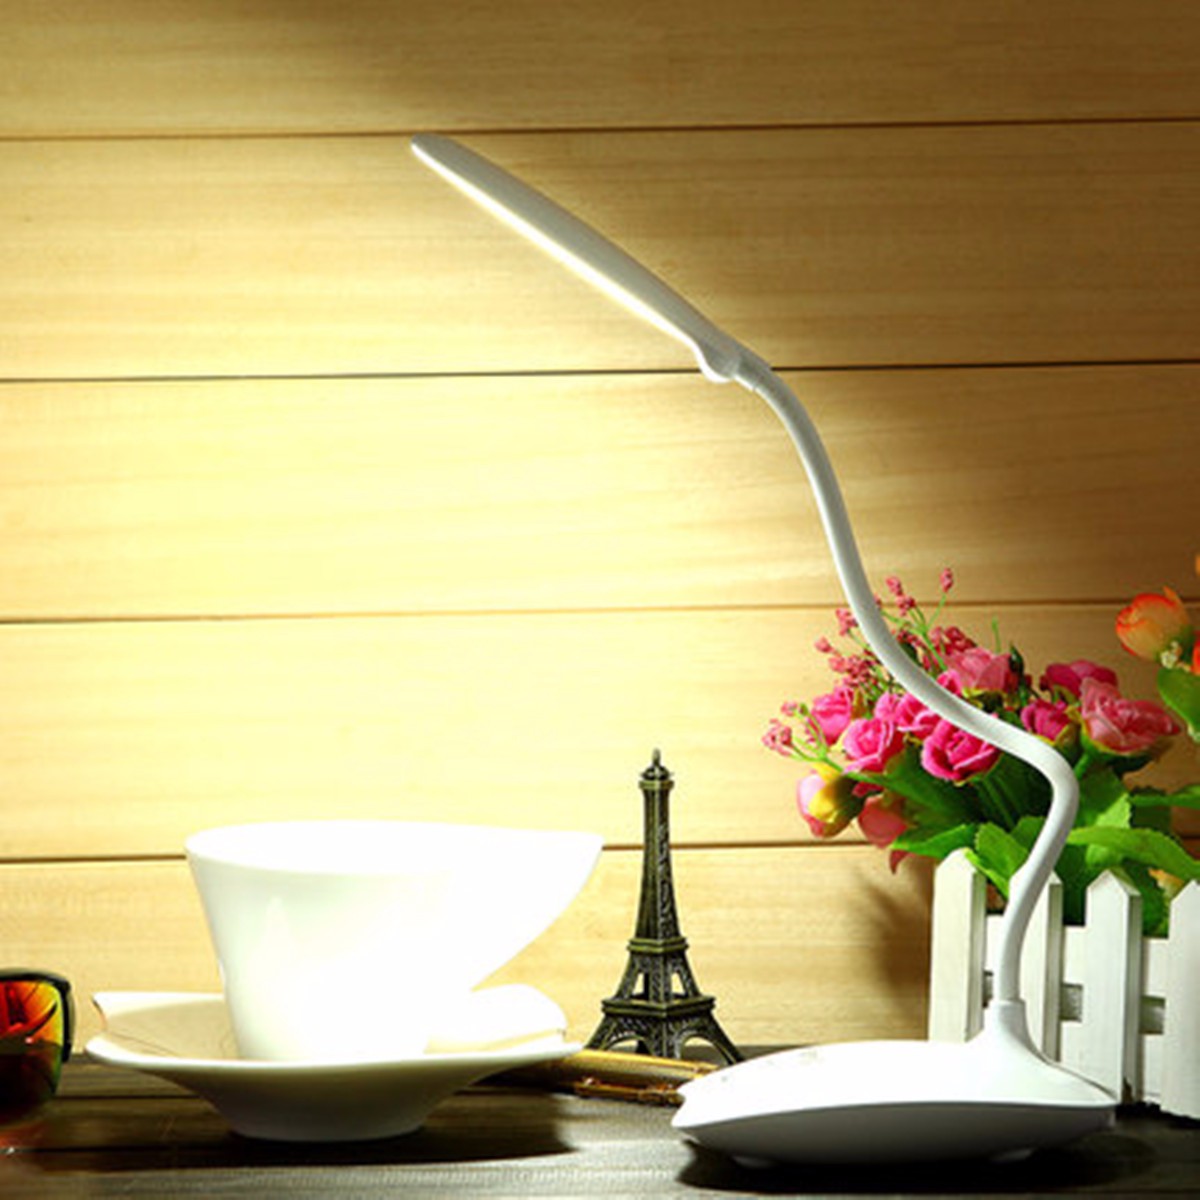 Flexible-Rechargeable-Dimmable-USB-LED-Night-Light-Bedside-Desktop-Reading-Table-Lamp-1118136-2